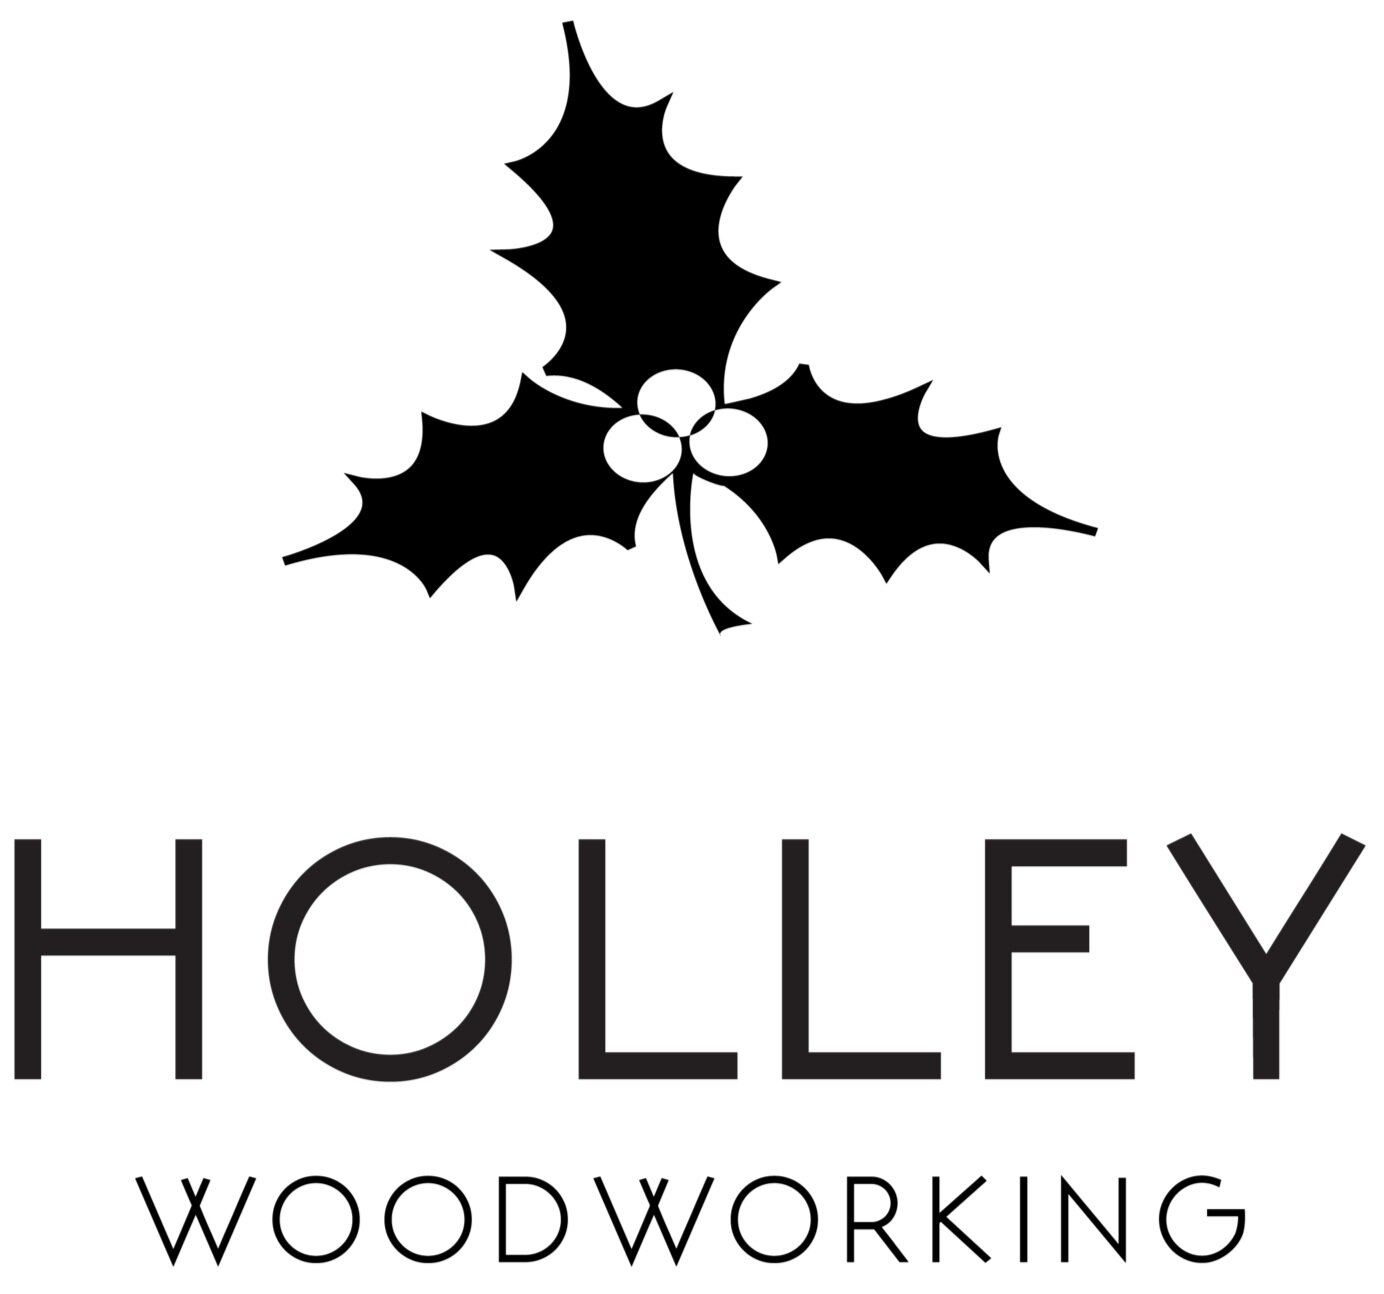 Holley Woodworking - Solid Wood Furniture, Bespoke Kitchen wares &amp; Cutting Boards